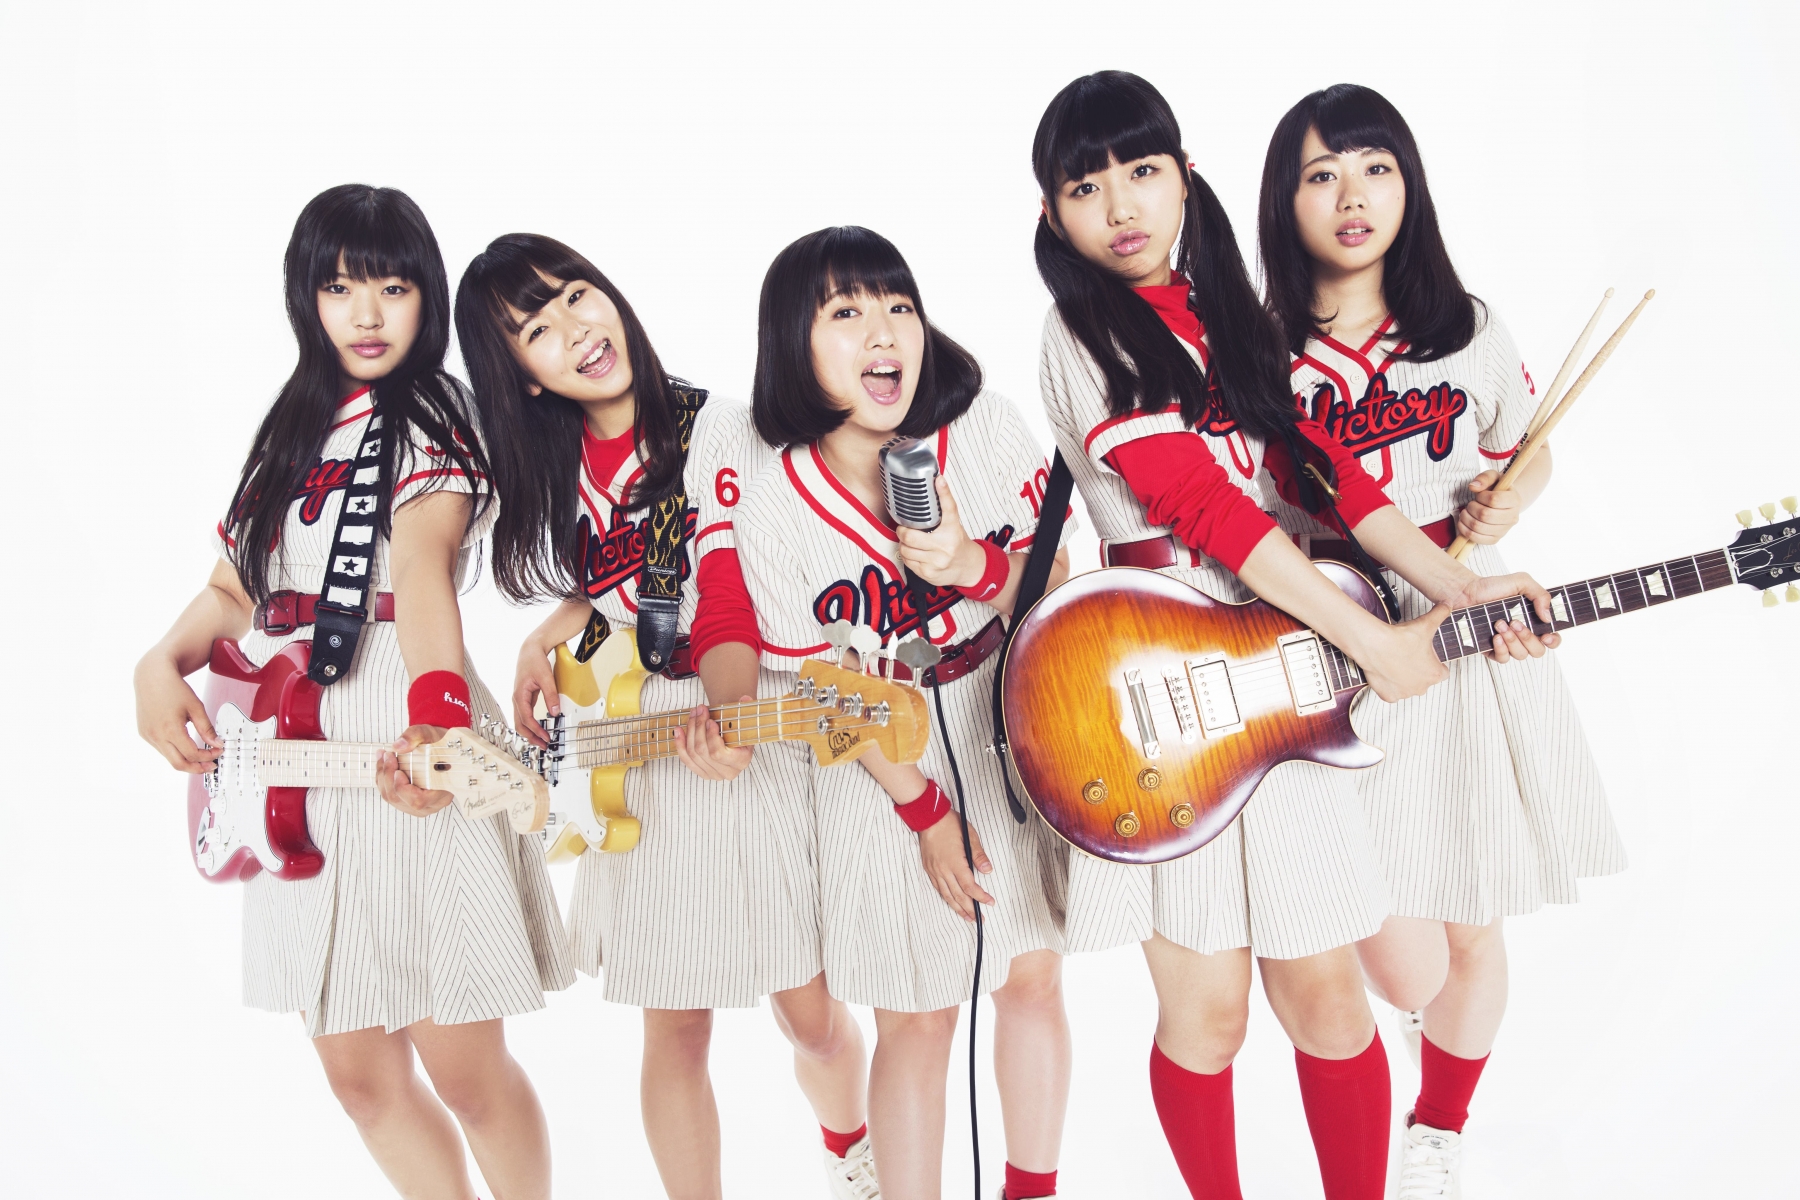 Ganbare! Victory Clear the Benches in the MV for “Rarirarira”!